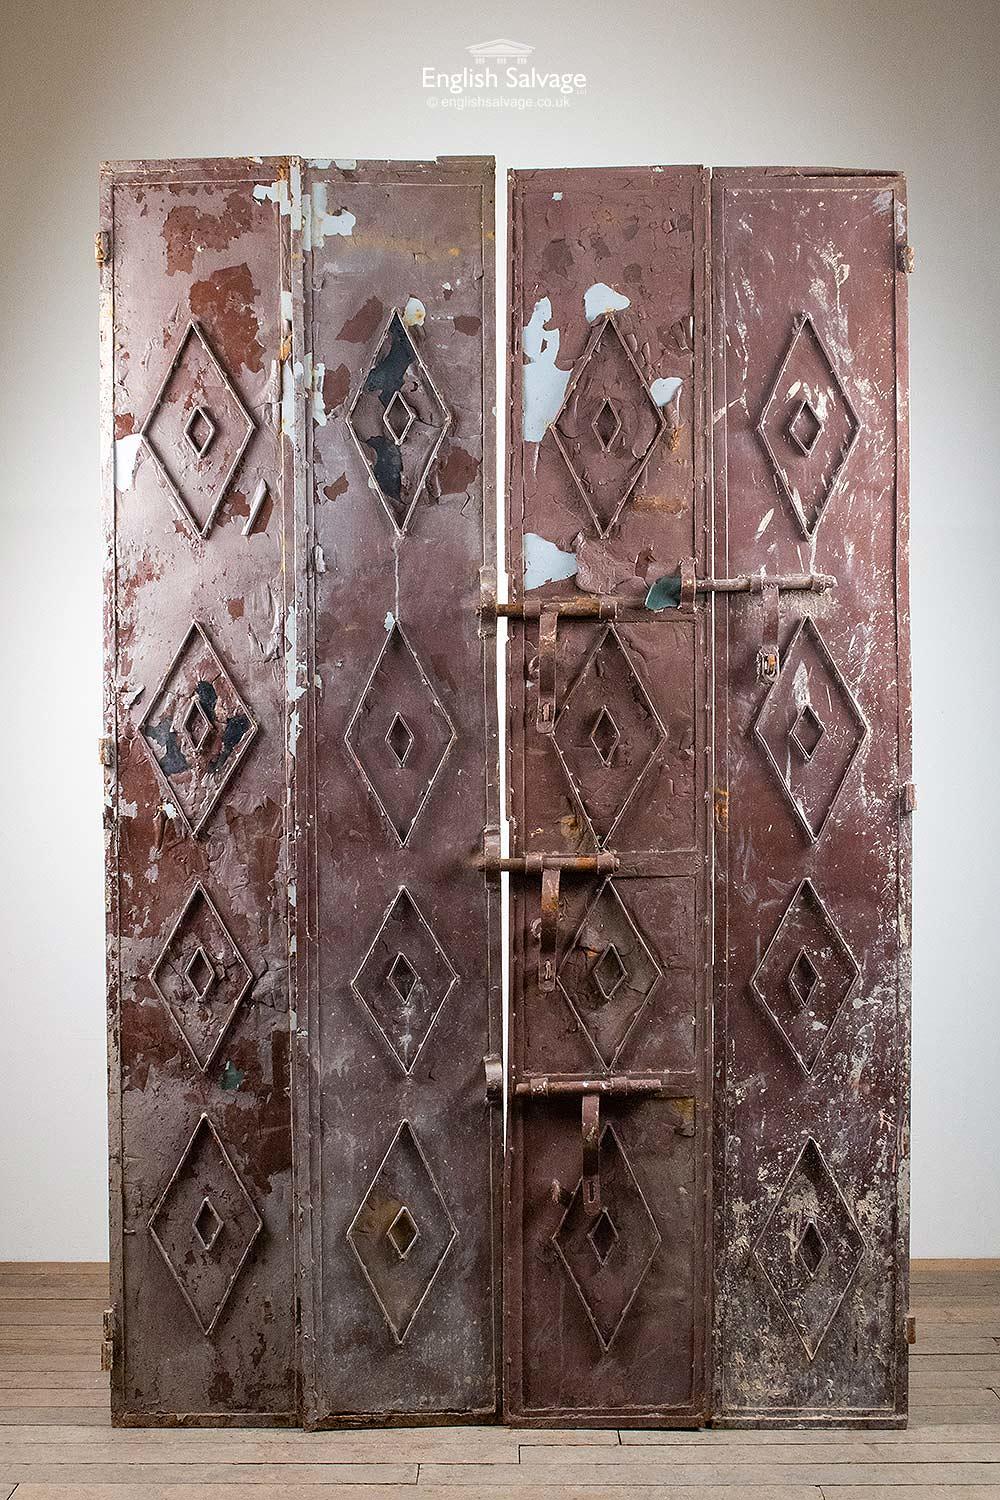 Set of sheet metal folding doors from a Moroccan film set. Each door is 36cm wide. Painted brown to the one side with diamond and circle detailing and three large bolts. The rear sides have a large harlequin like brown and white design. Four doors